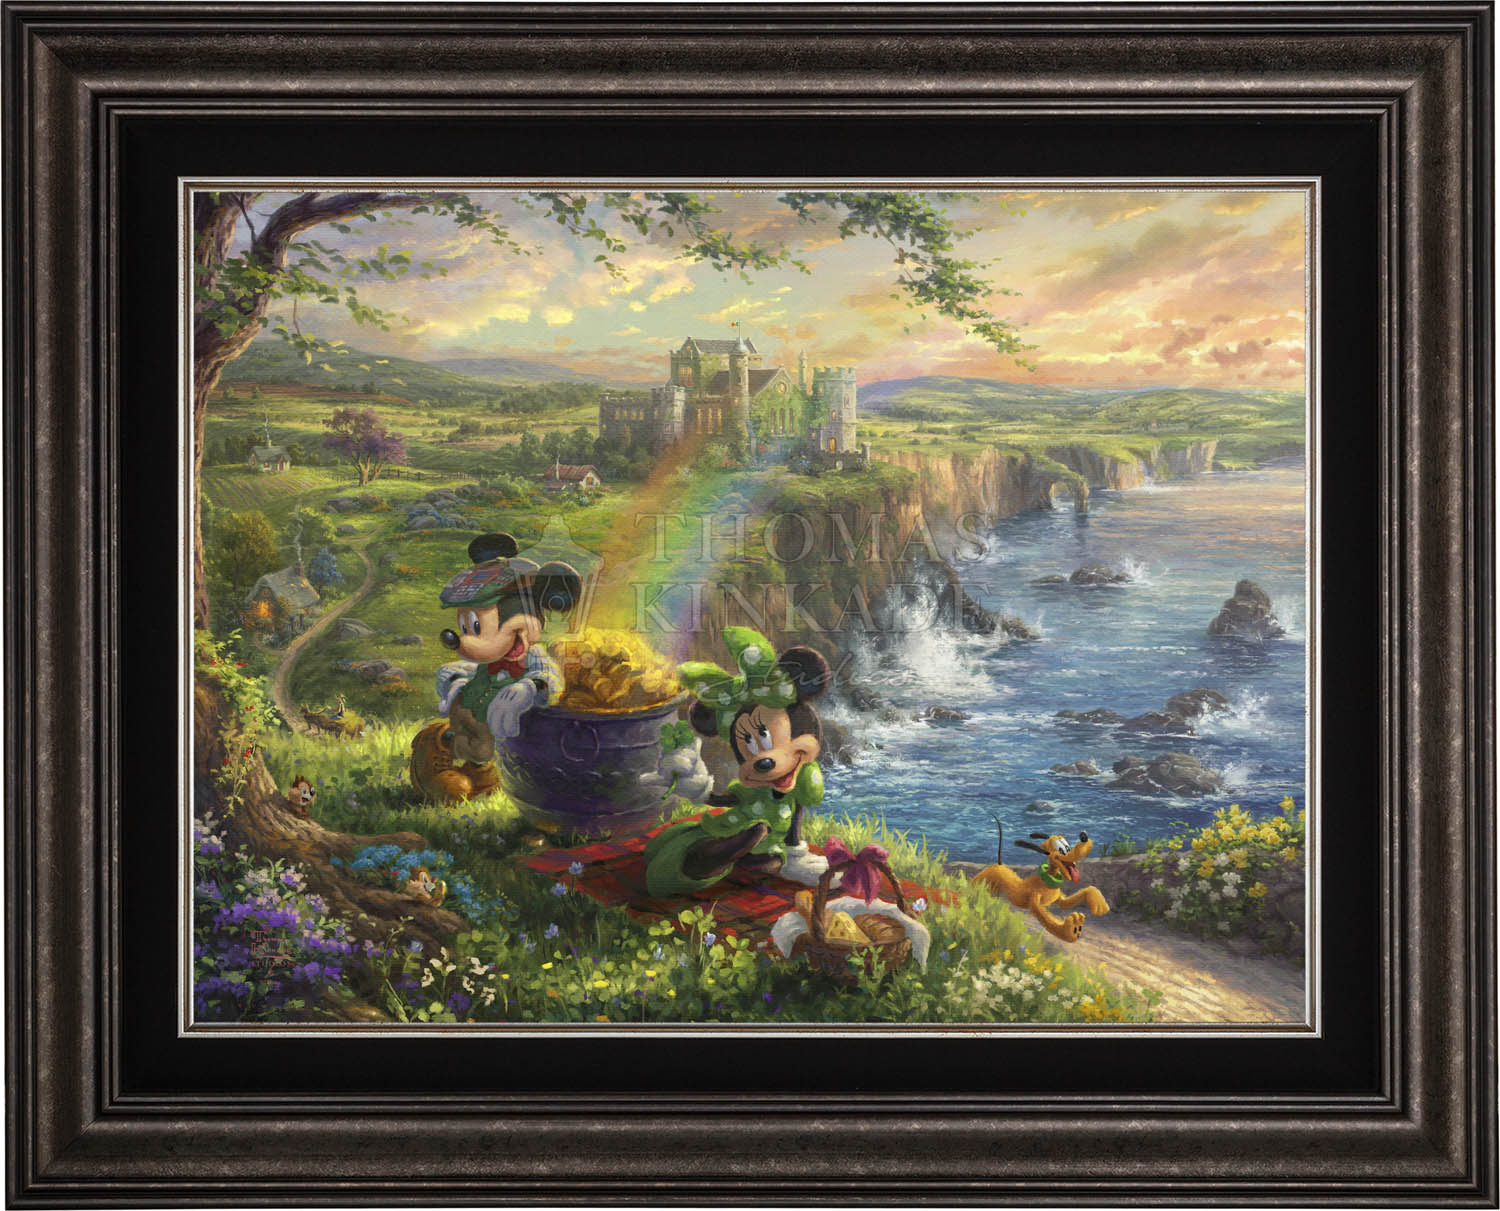 Dressed in the Irish's traditional color, Mickey and Minnie seem to have luck on their side.  Dark PewterFrame